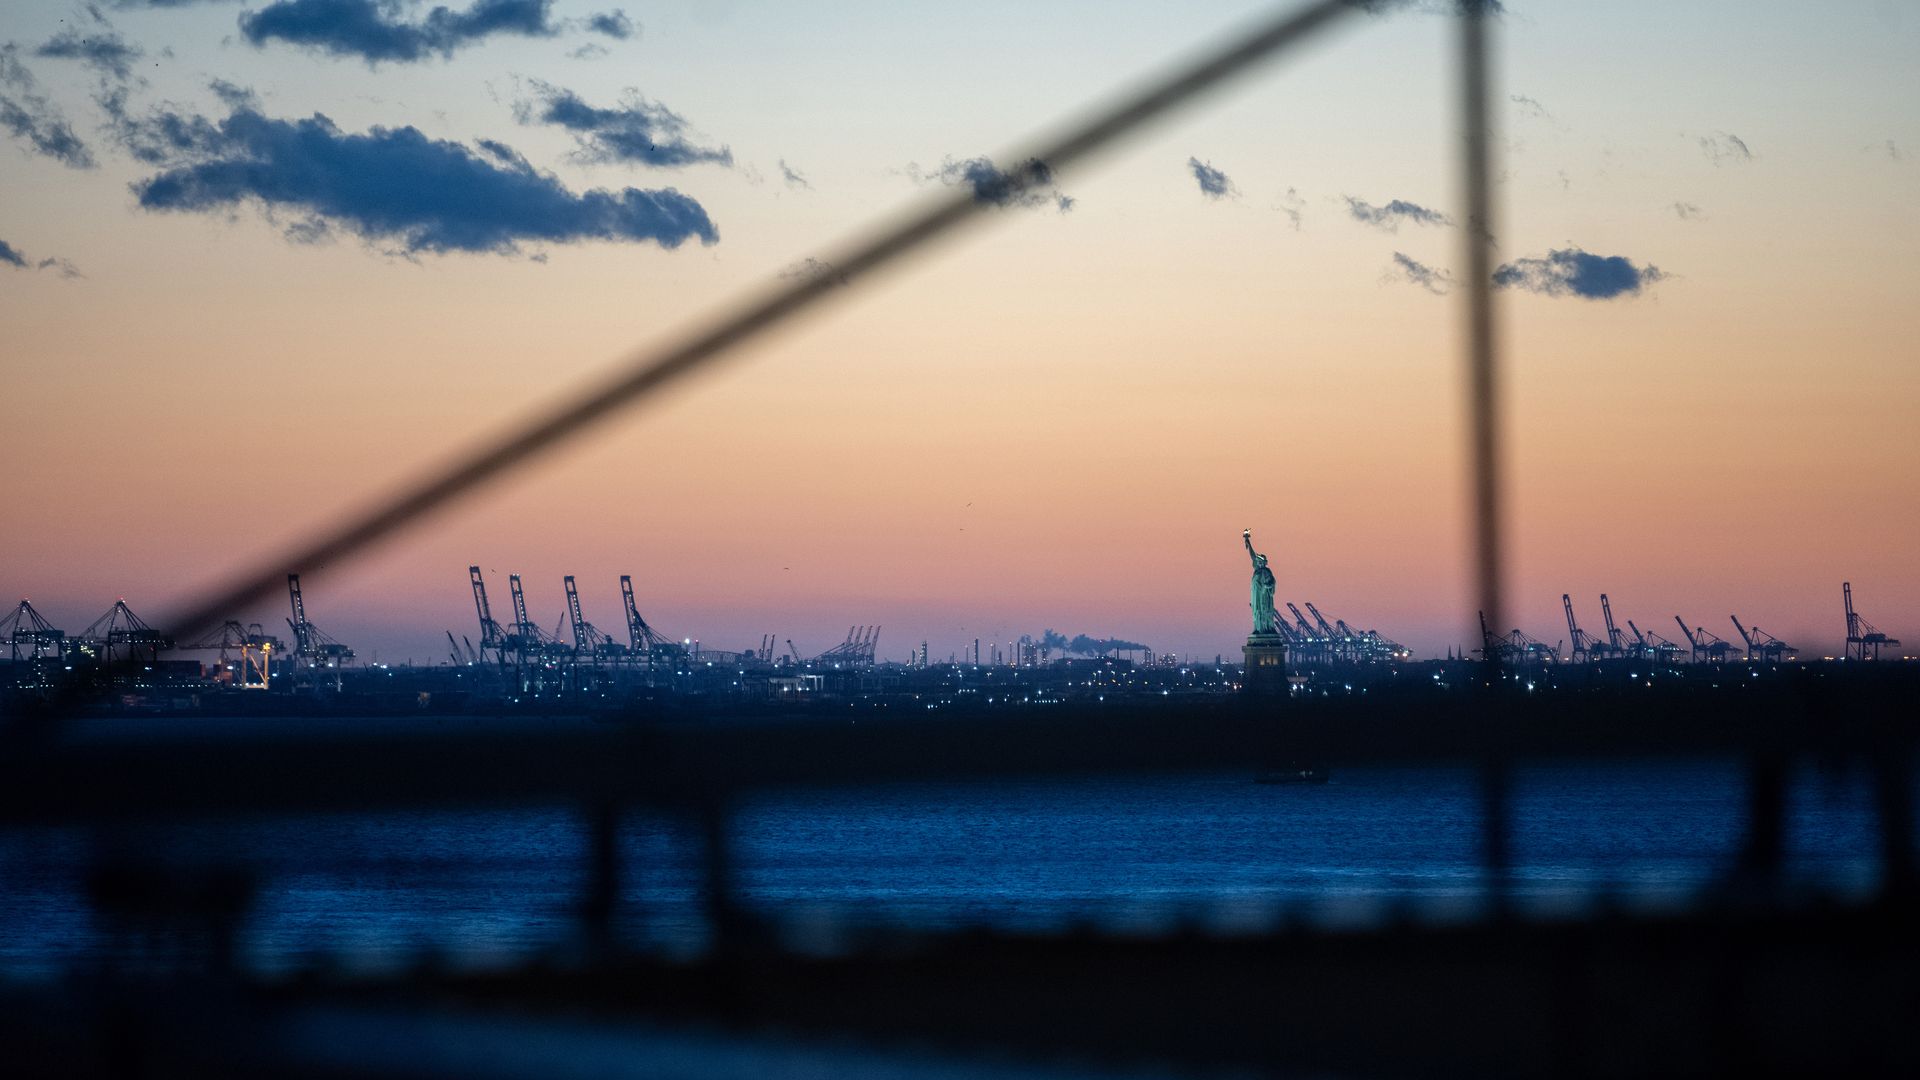 A view of The Statue of Liberty during the first sunset after the clocks changed for Daylight Savings as seen from the Brooklyn Bridge on March 14, 2021 in the Brooklyn borough of New York City. 